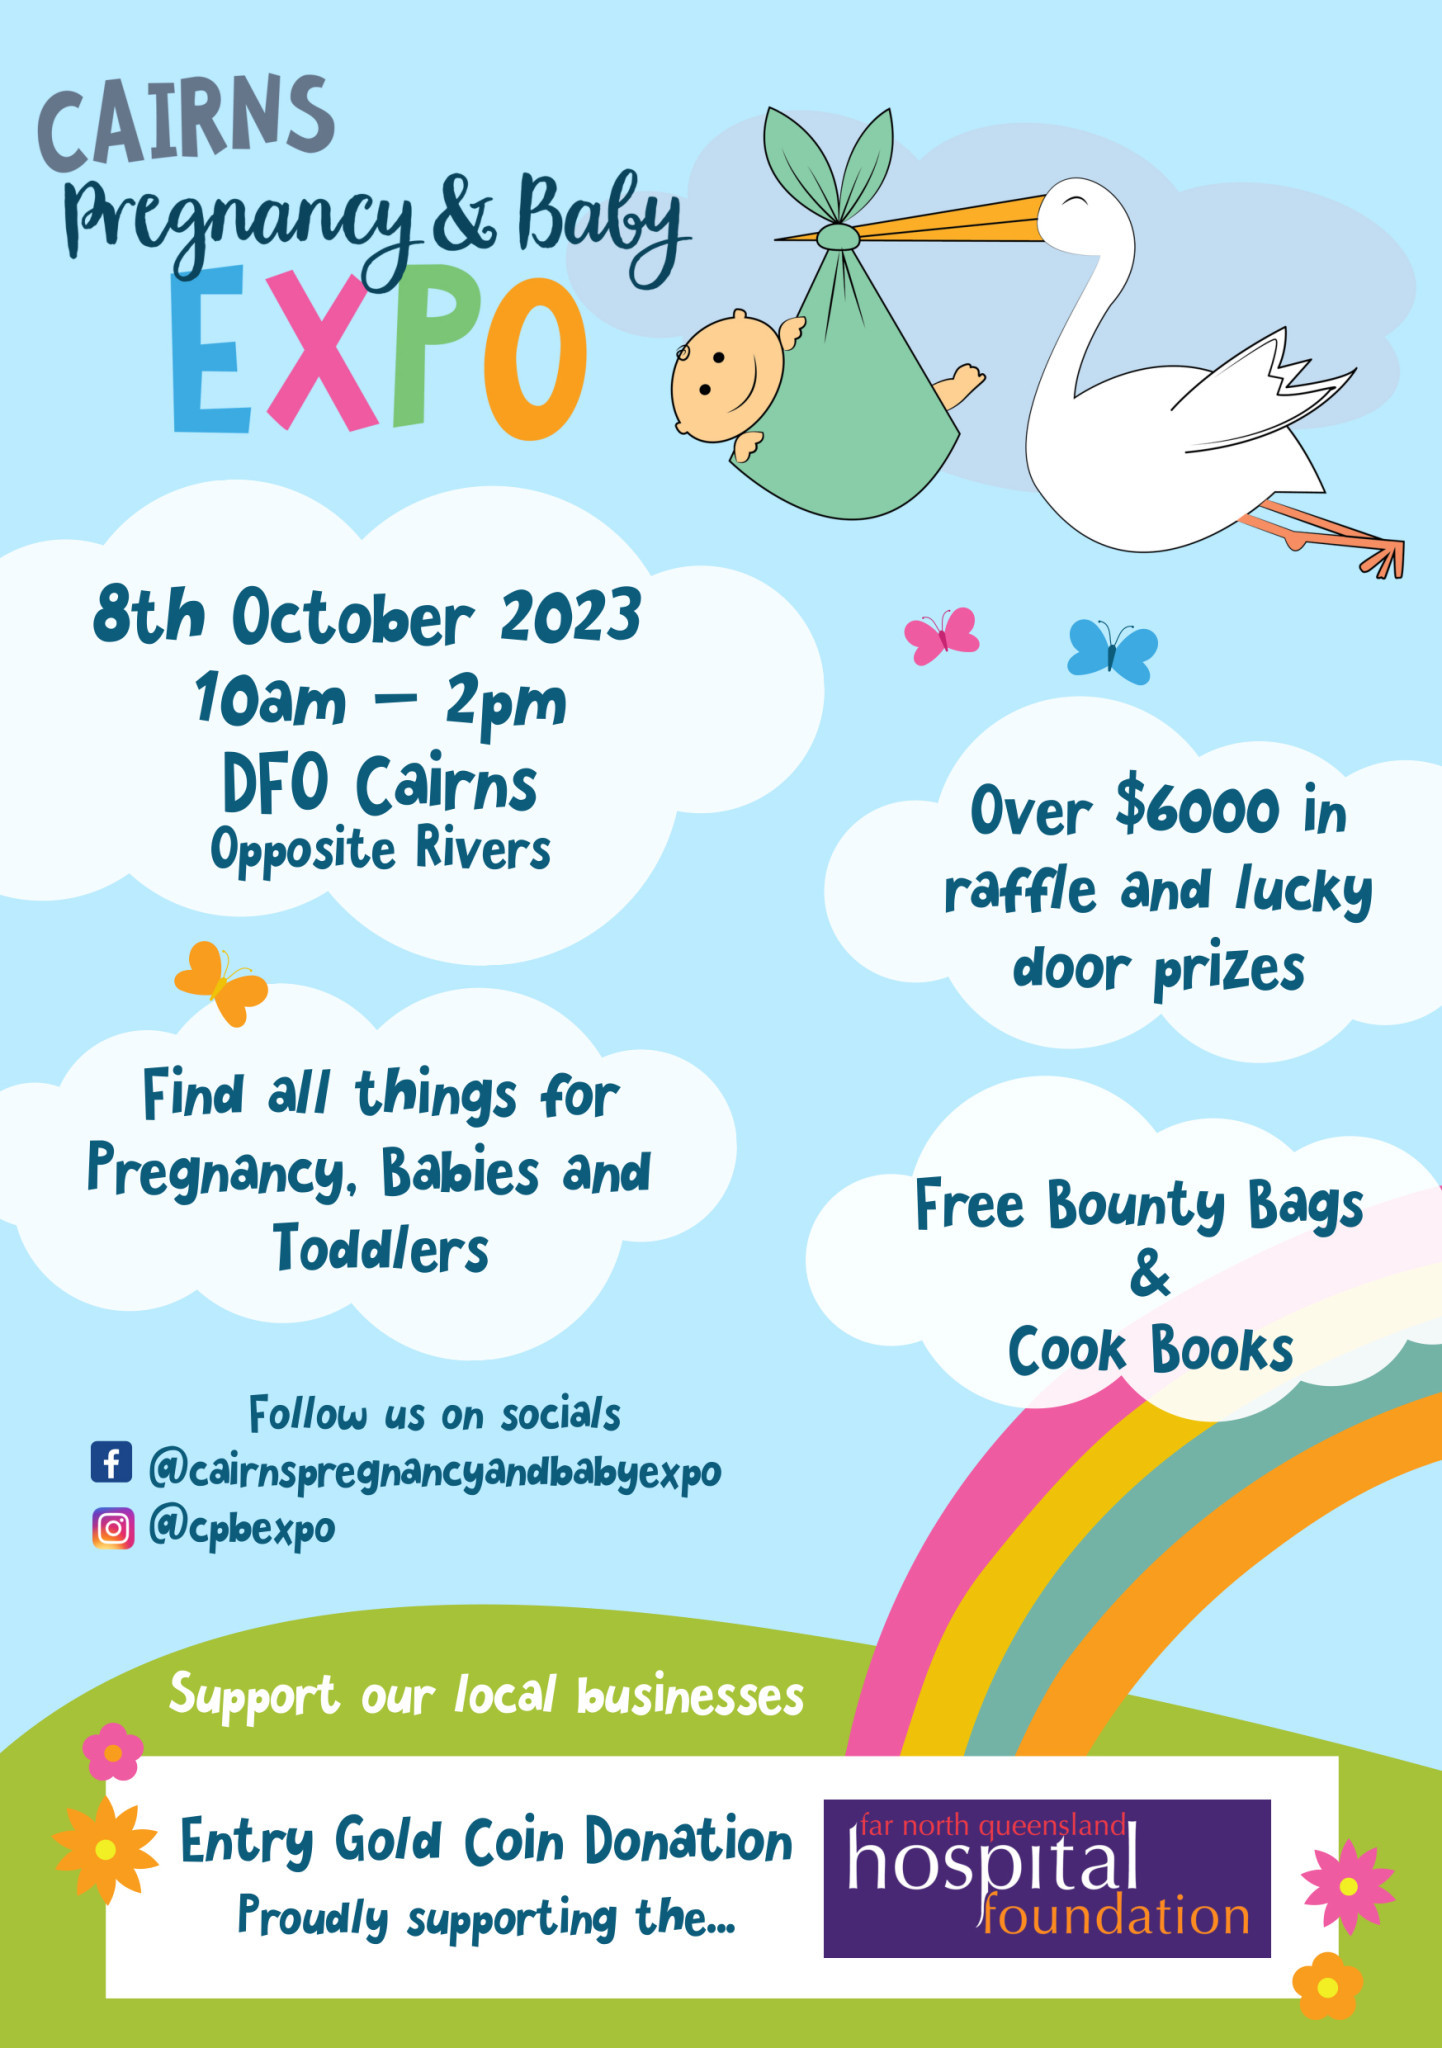 Cairns Pregnancy and Baby Expo Inc 0923